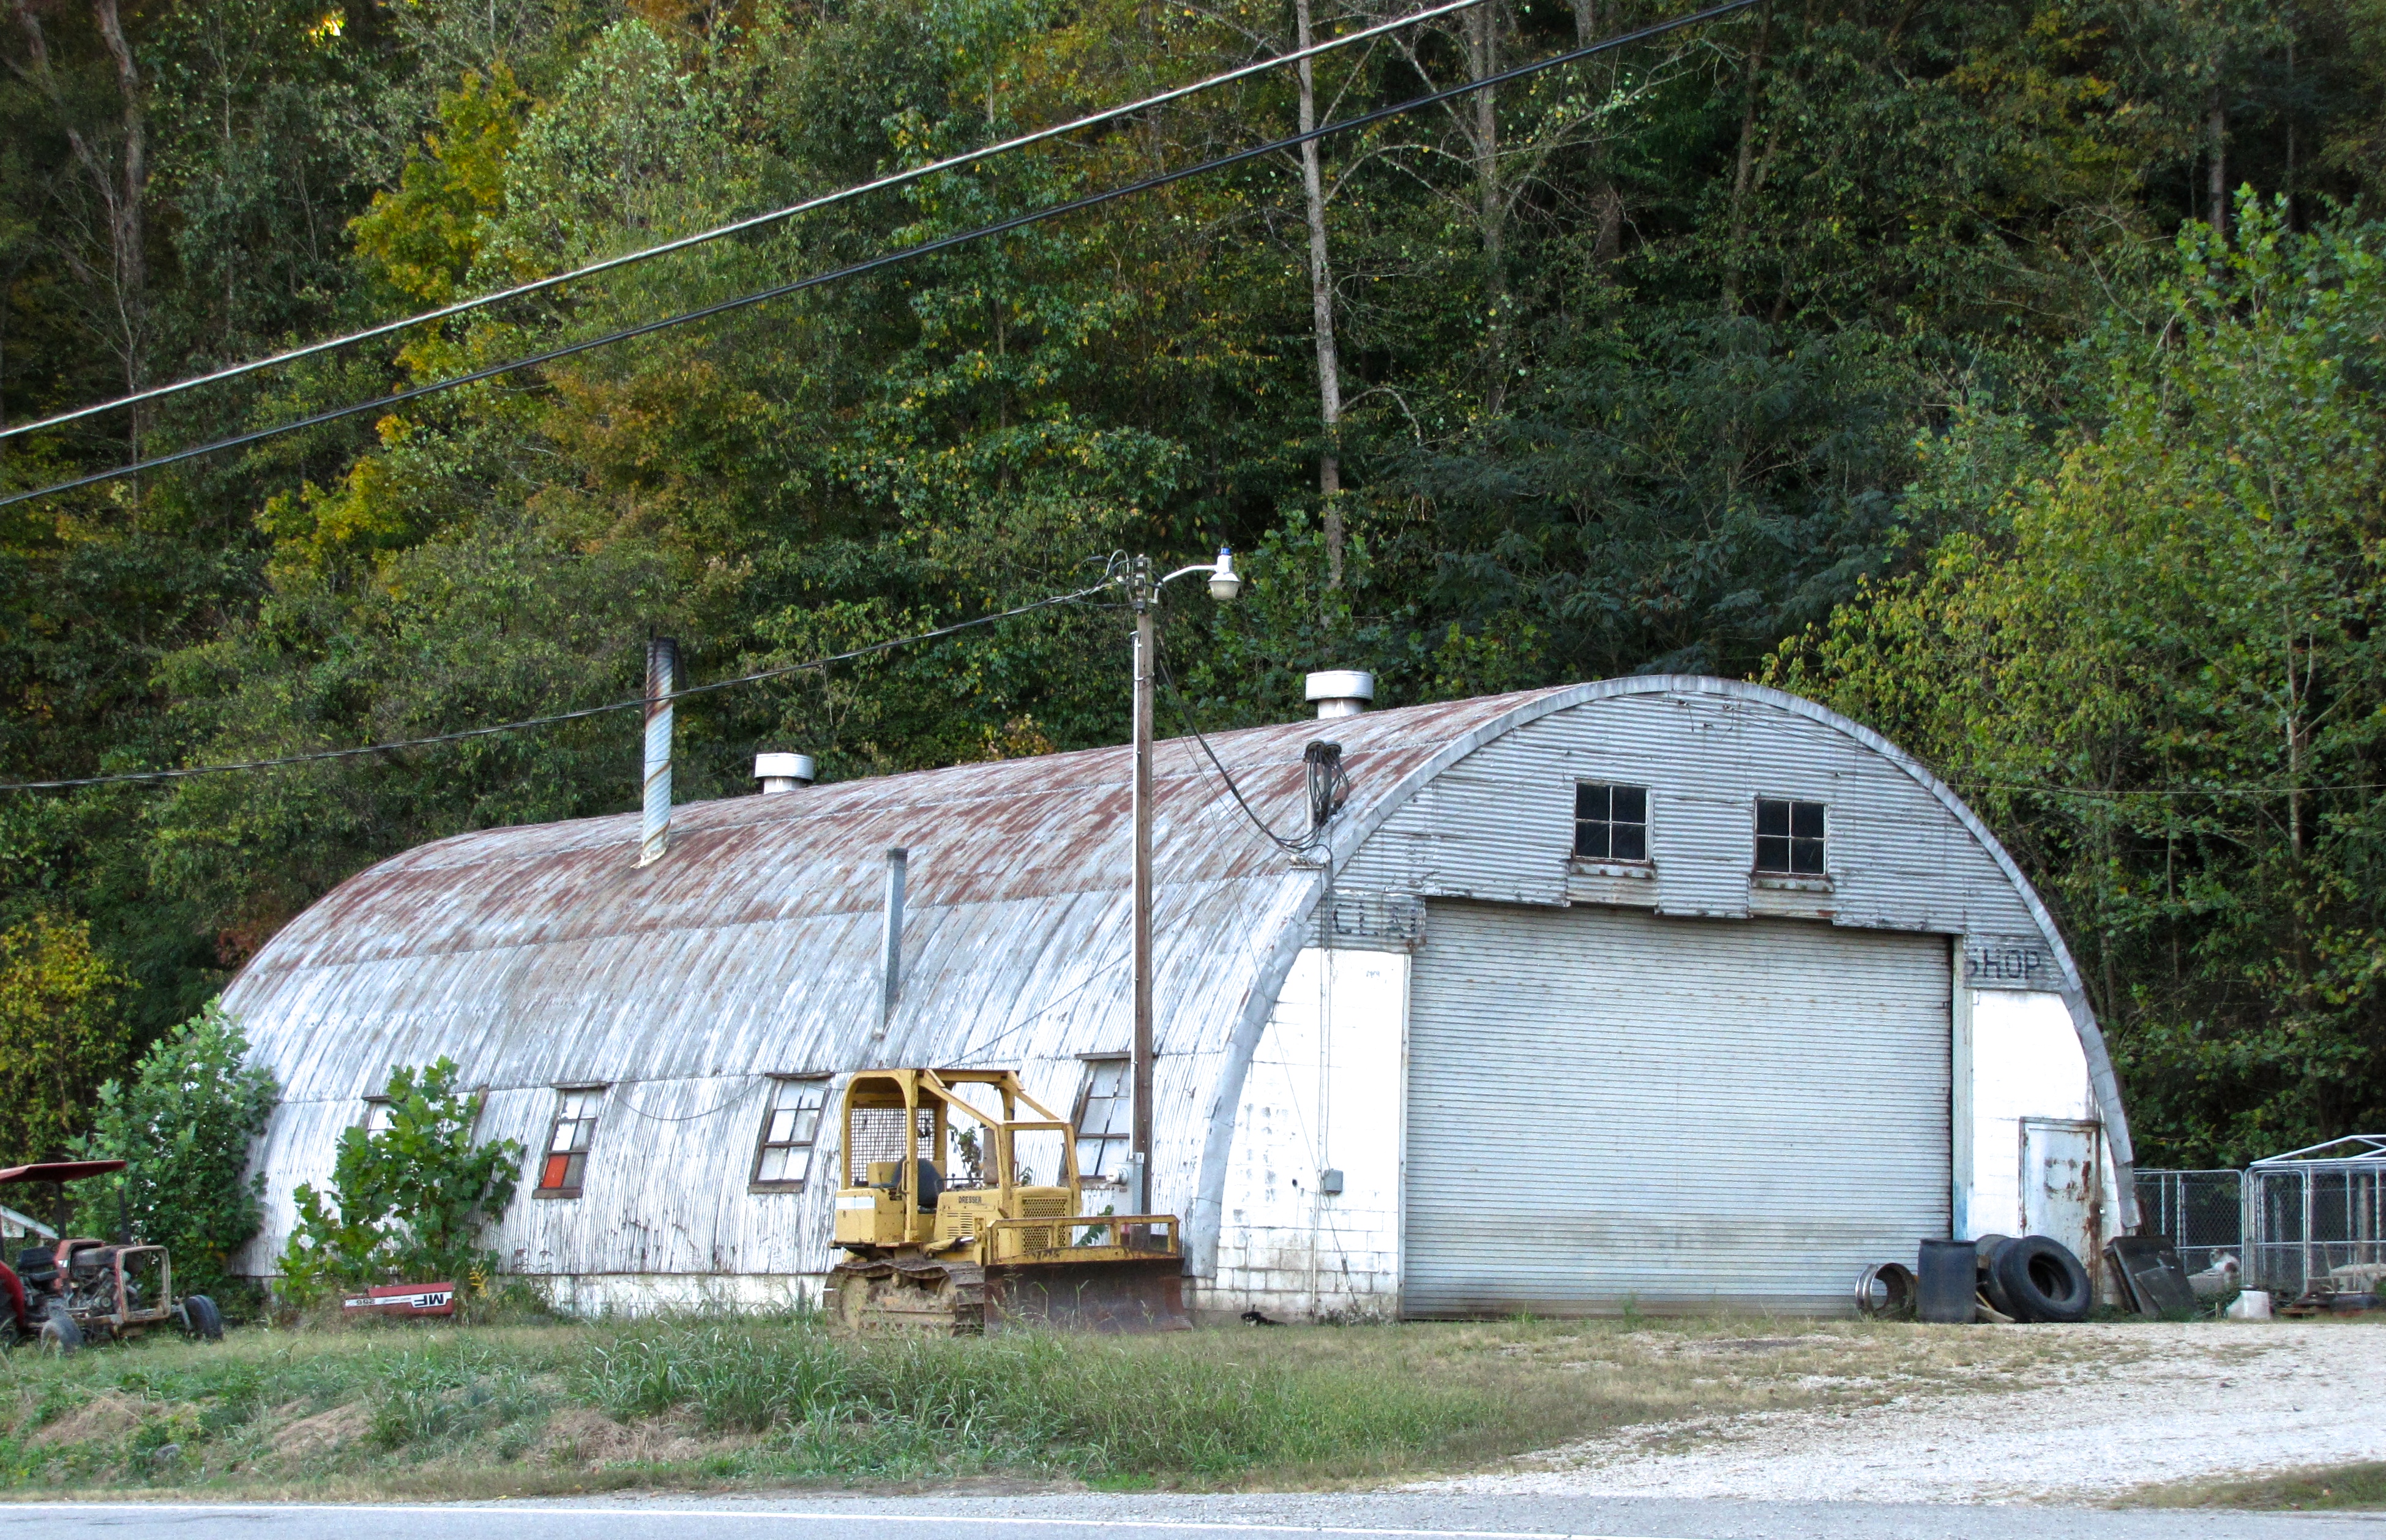 quonset hut in Hopkinsville, KY